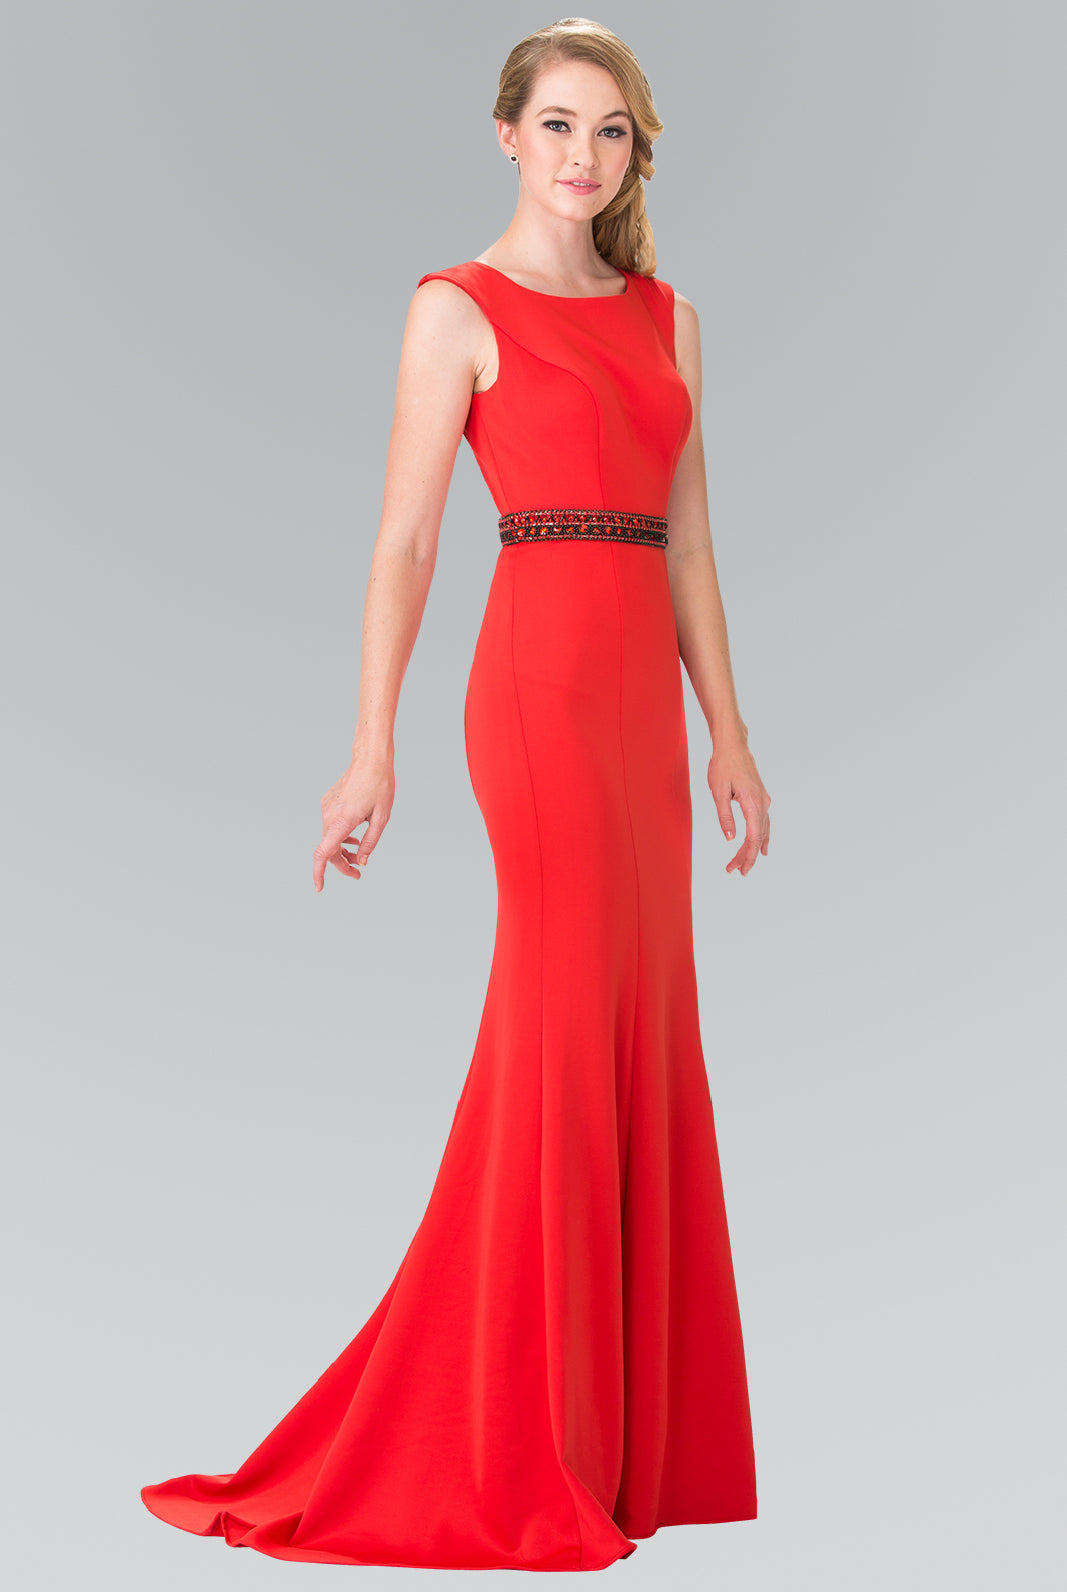 Beaded Waist Line Jersey Dress with Cut-Out Back-smcdress